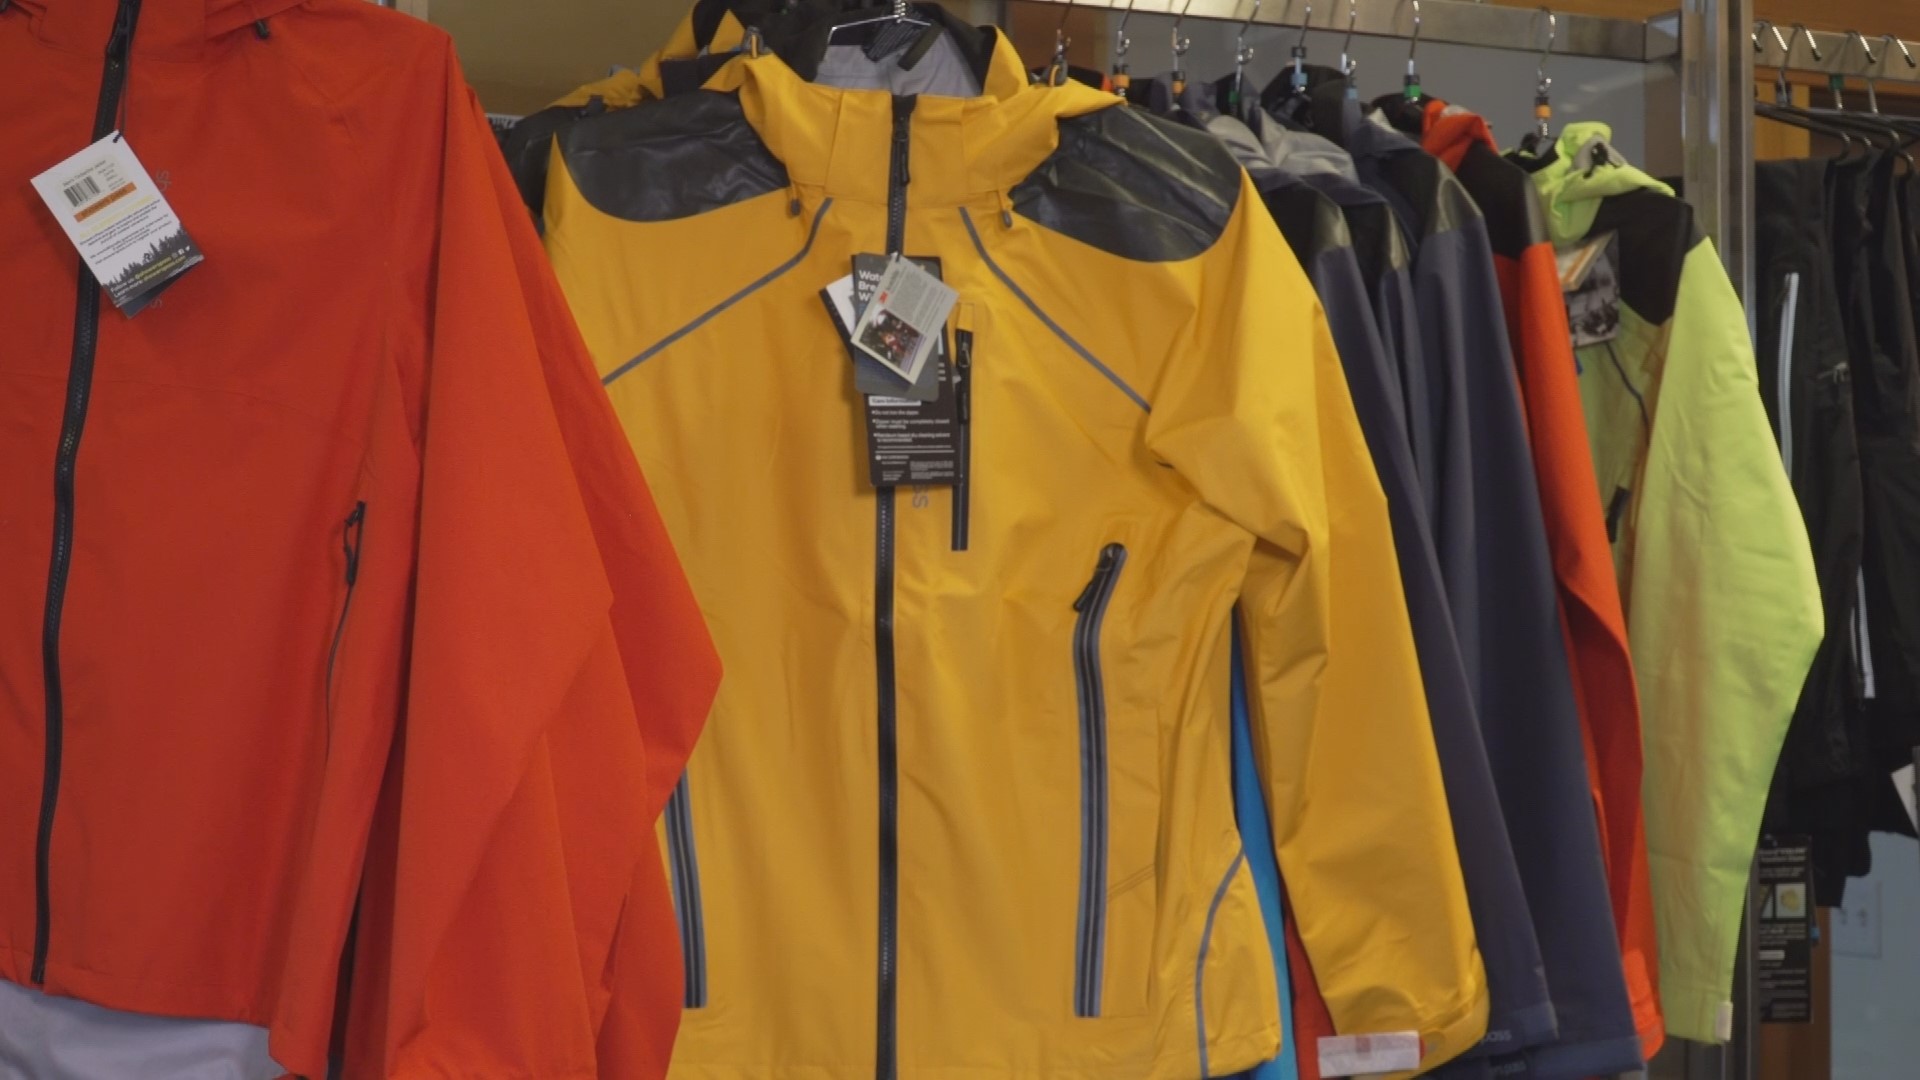 Portland-based company Showers Pass has produced durable sportwear for the past 25 years. In 2019, the owner set a goal to make gear with fully recycled materials.